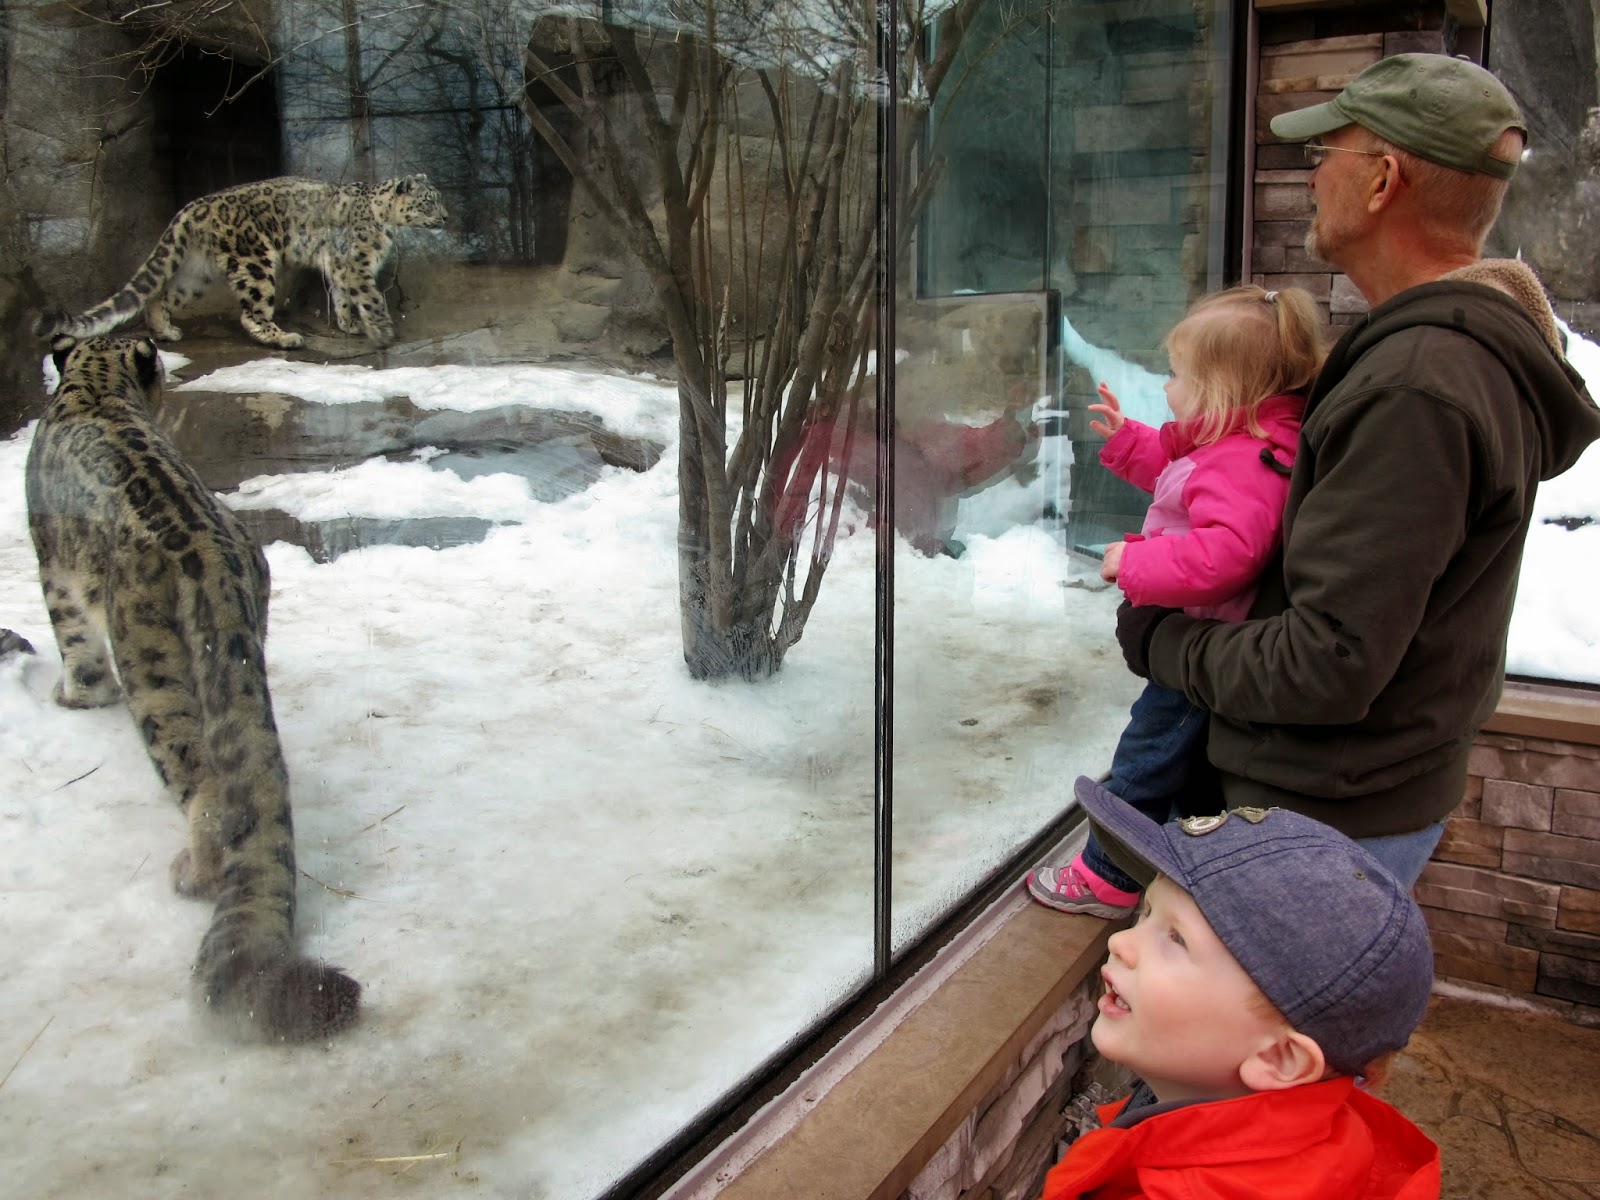 Seeing the Snow Leopard Cubs